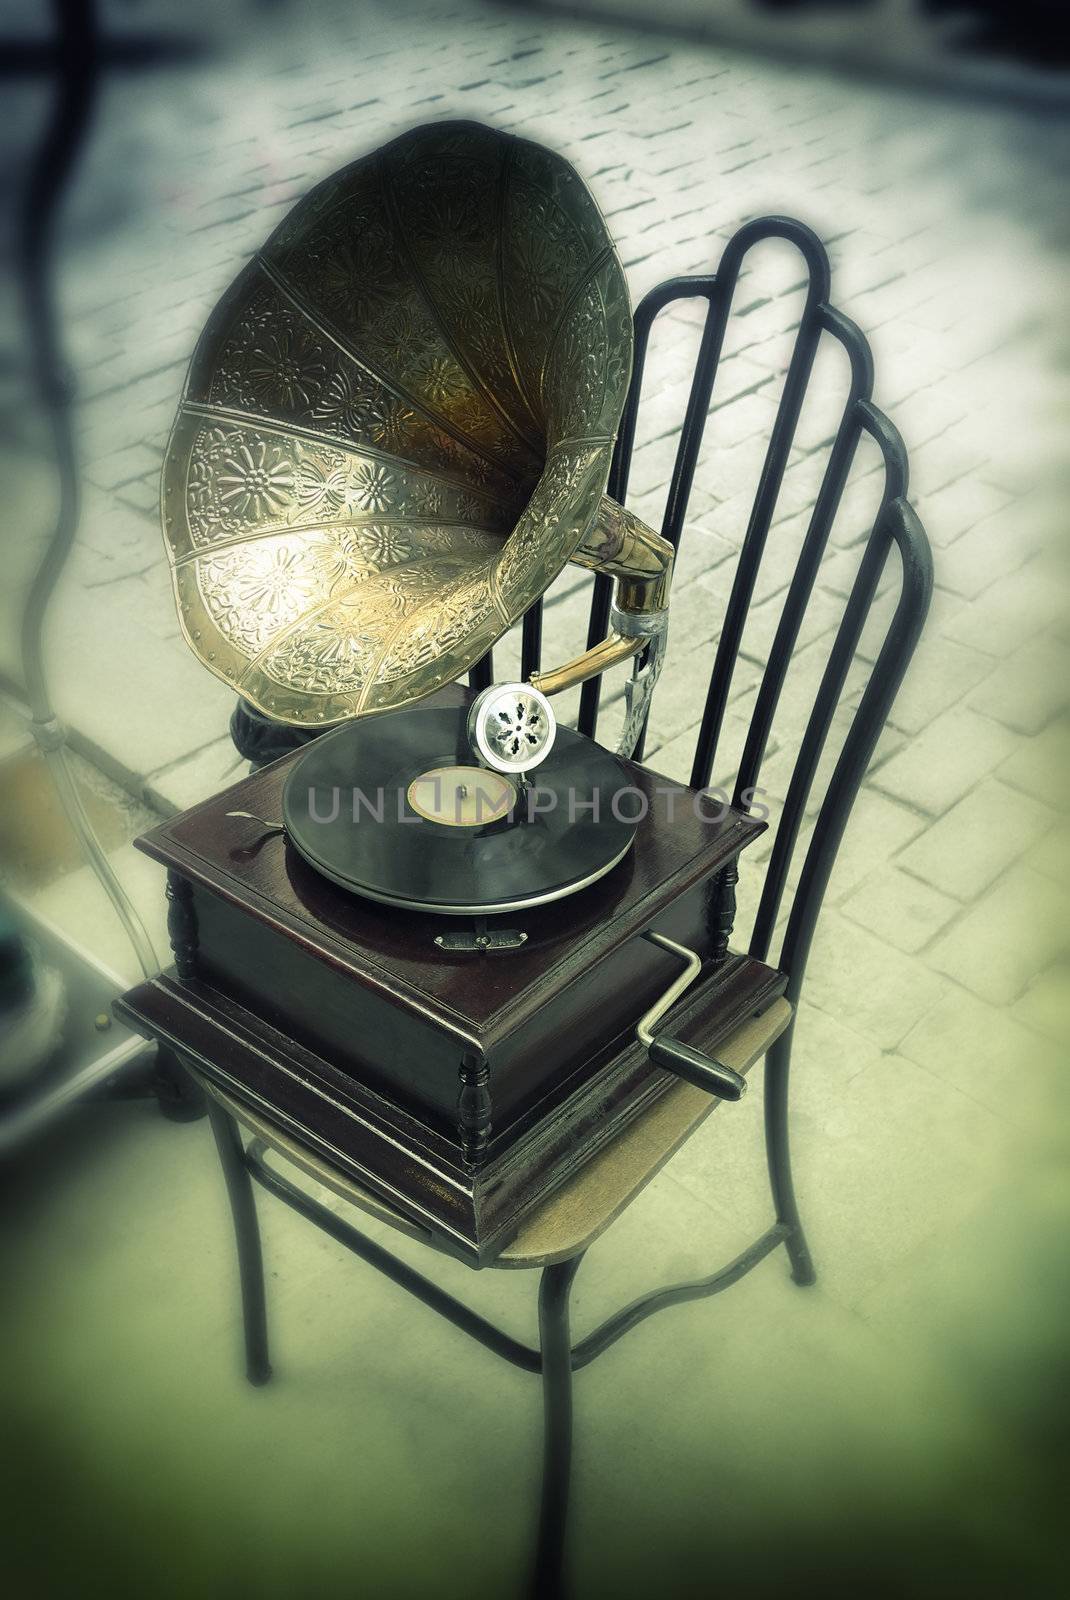 Antique gramophone by ABCDK